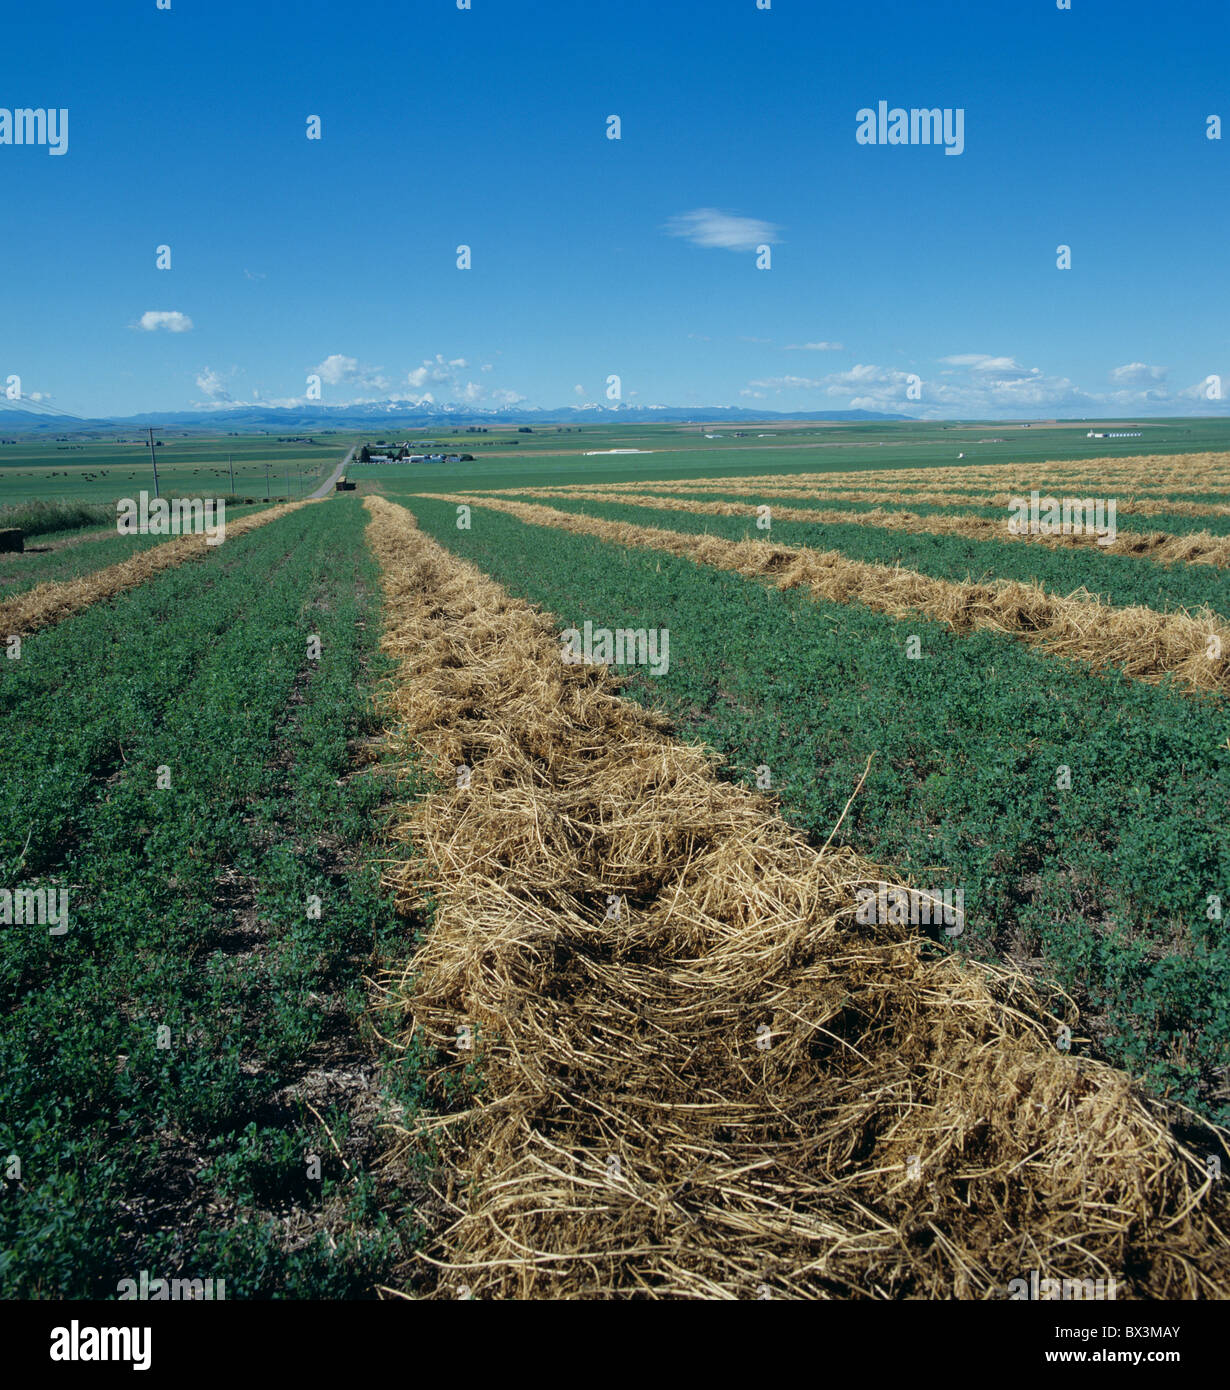 Cut alfalfa crop with swaths of alfalfa straw brown and ready for collection, Montana, USA Stock Photo